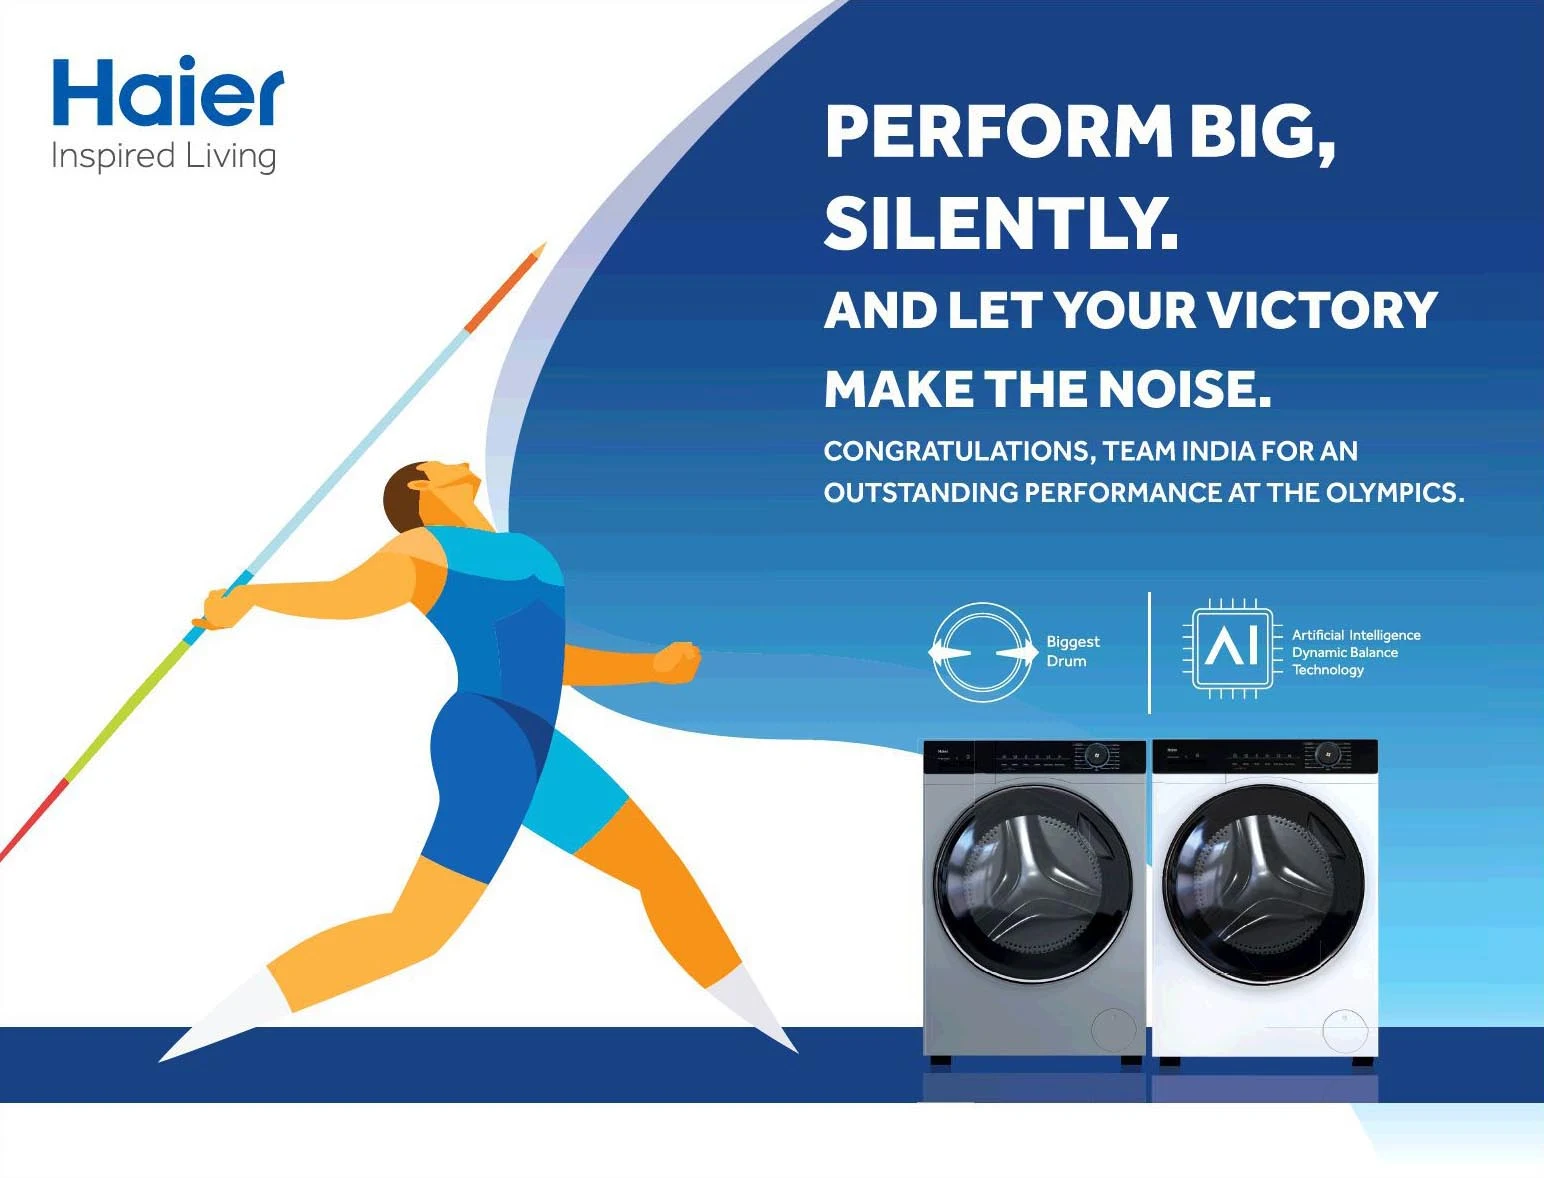 #3 Haier Inspire Living Perform Big, Silently